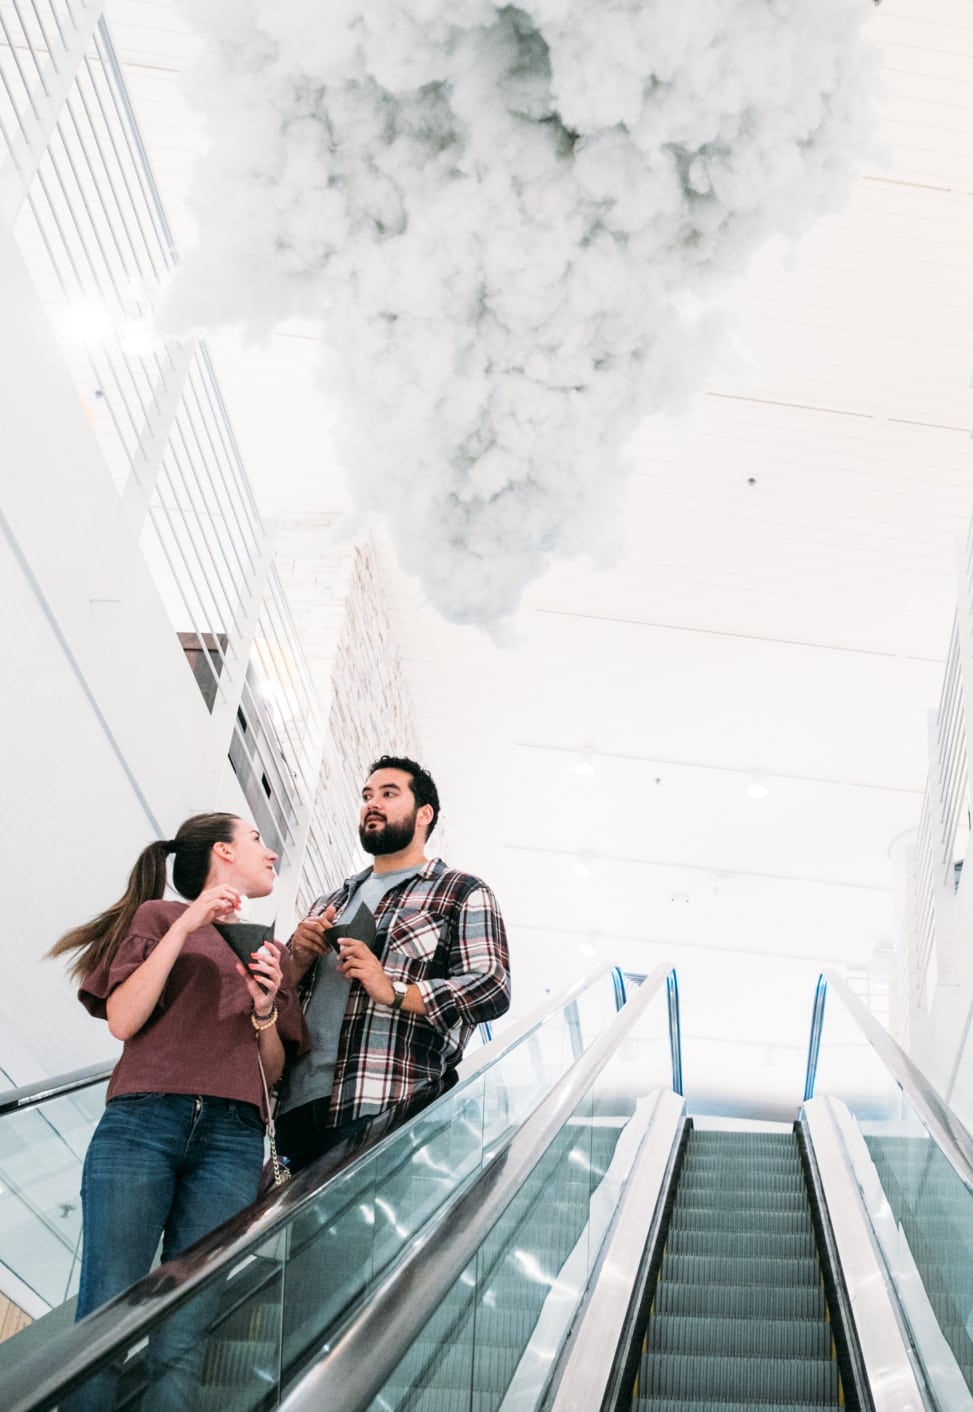 Two people riding and escalator beneath a cloud installation at the crate and barrel san francisco private registry event with a practical wedding